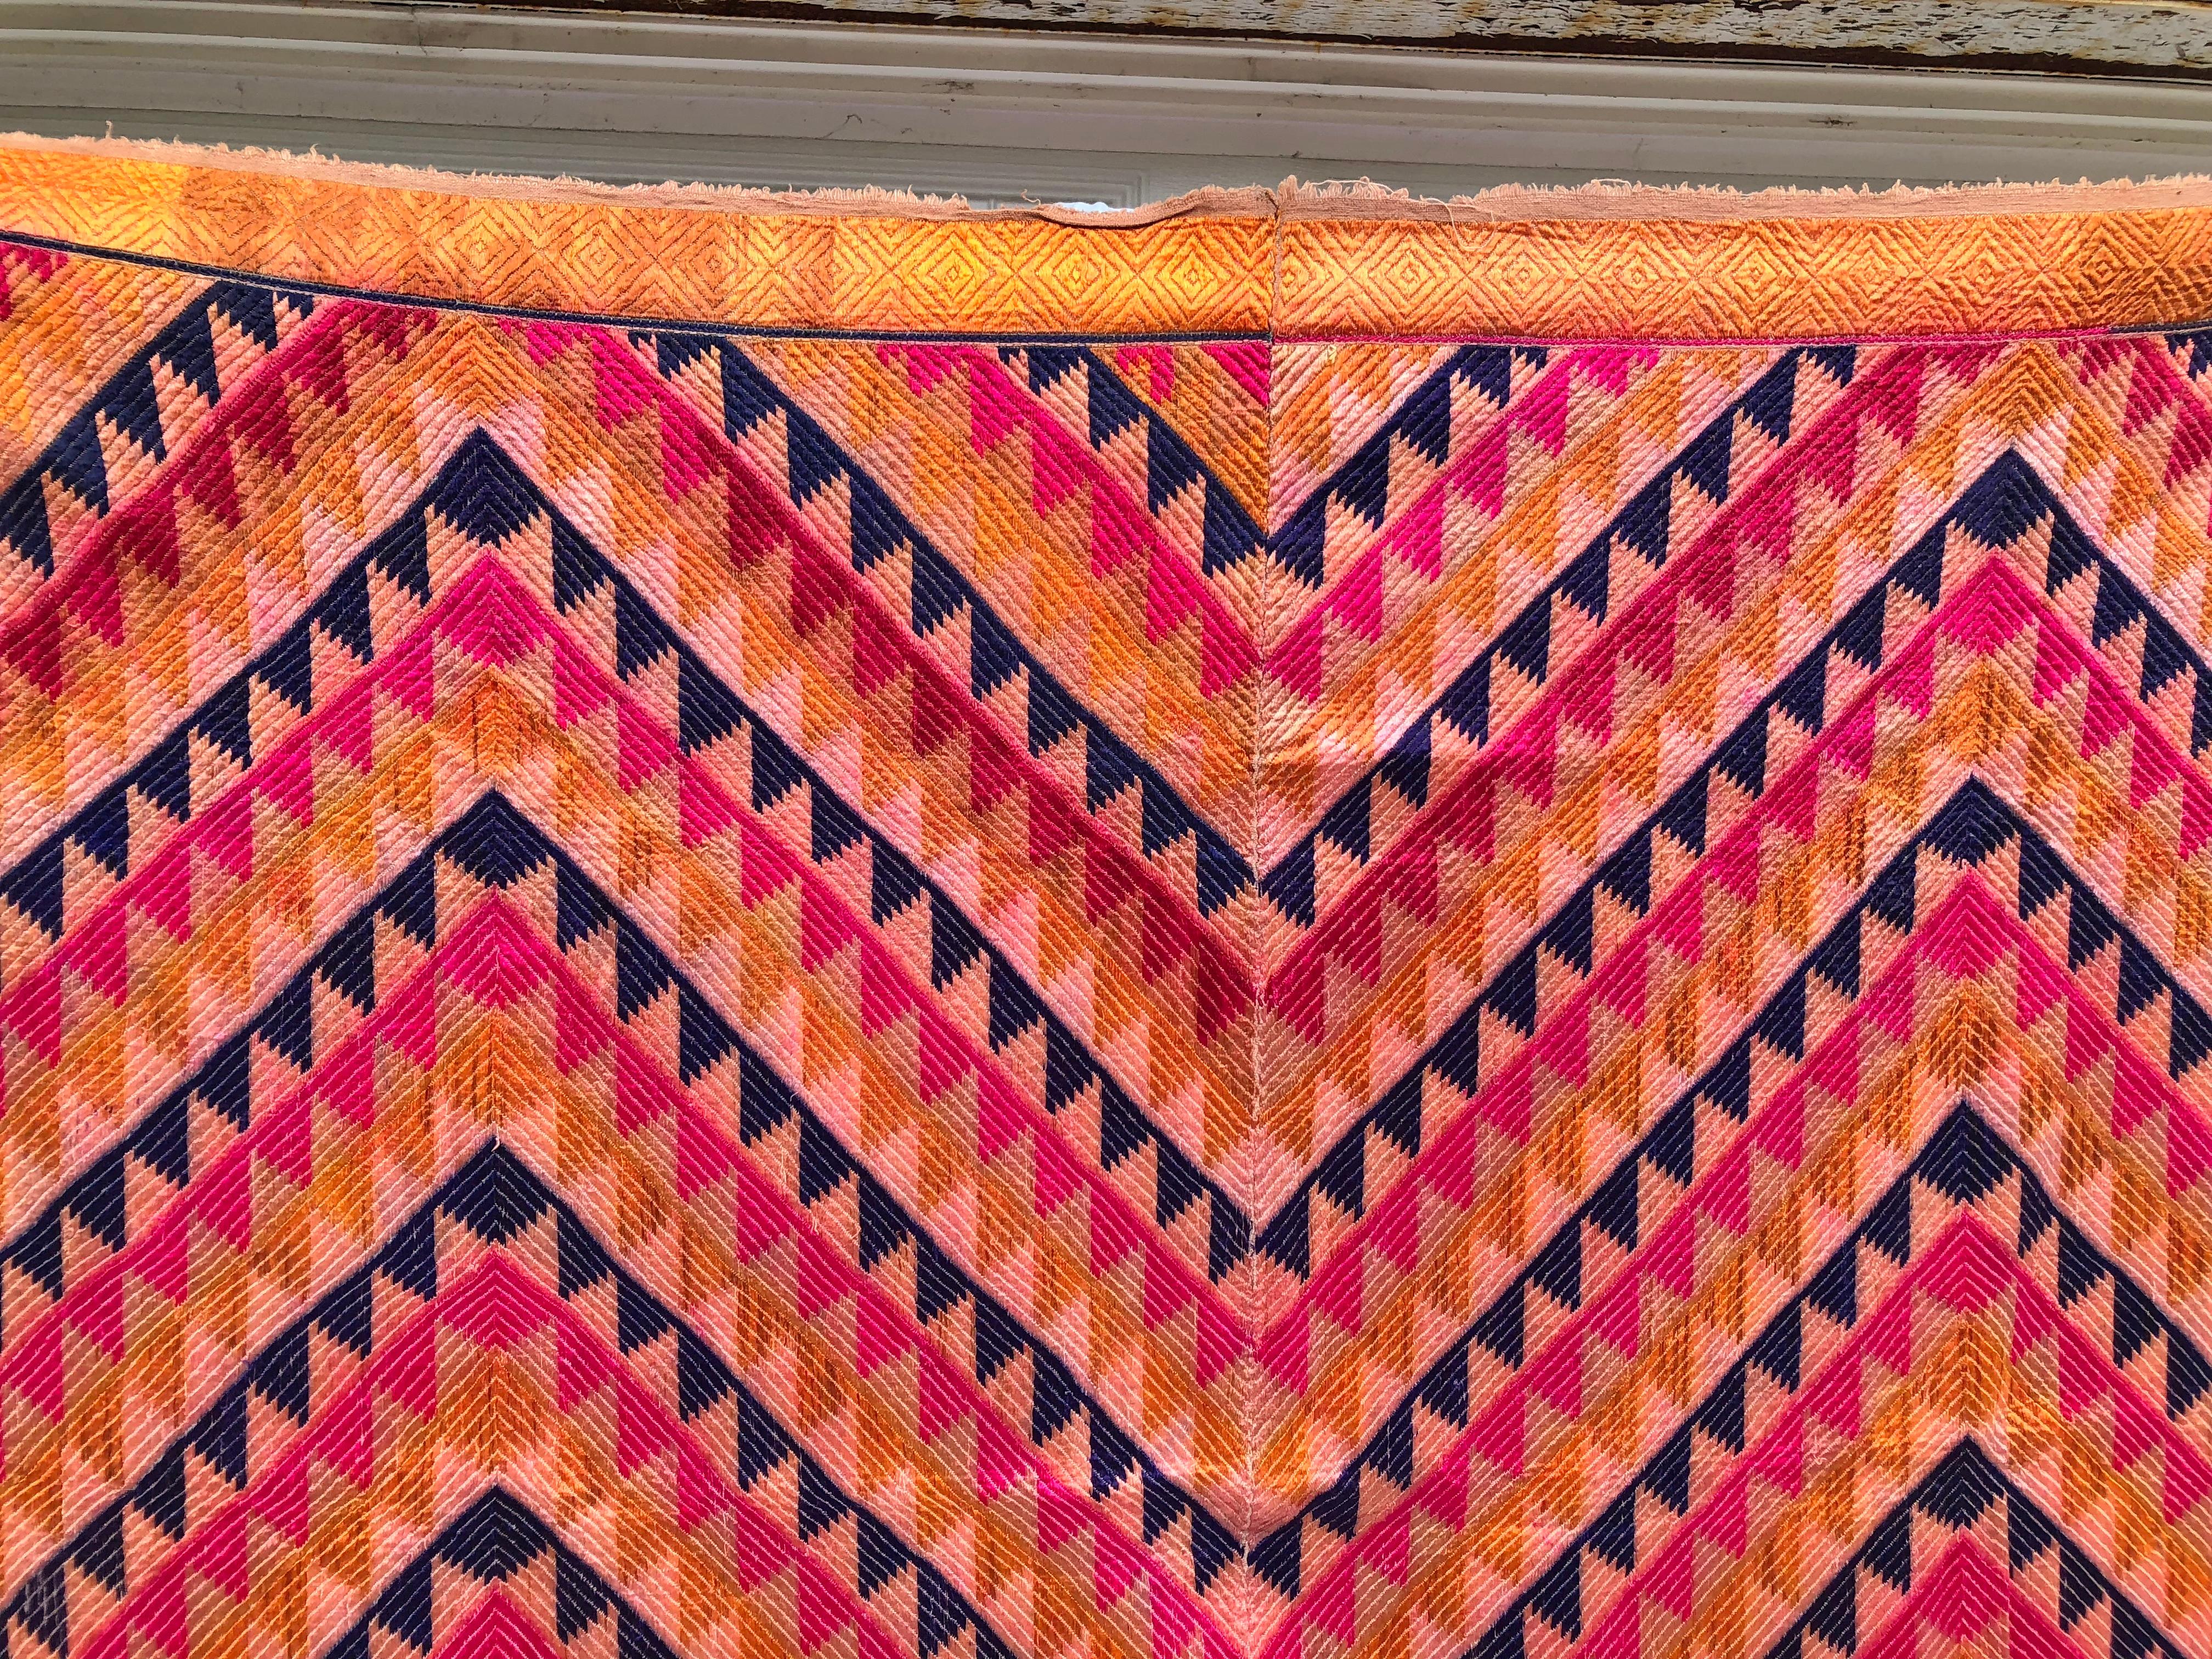 The shawl is hand woven cotton khadi cloth that is hand embroidered with vibrant silk threads. Made by the relatives of the young girl for her wedding and other special occasions. This is a very rare pattern for the phulkari bagh, Unfortunately the